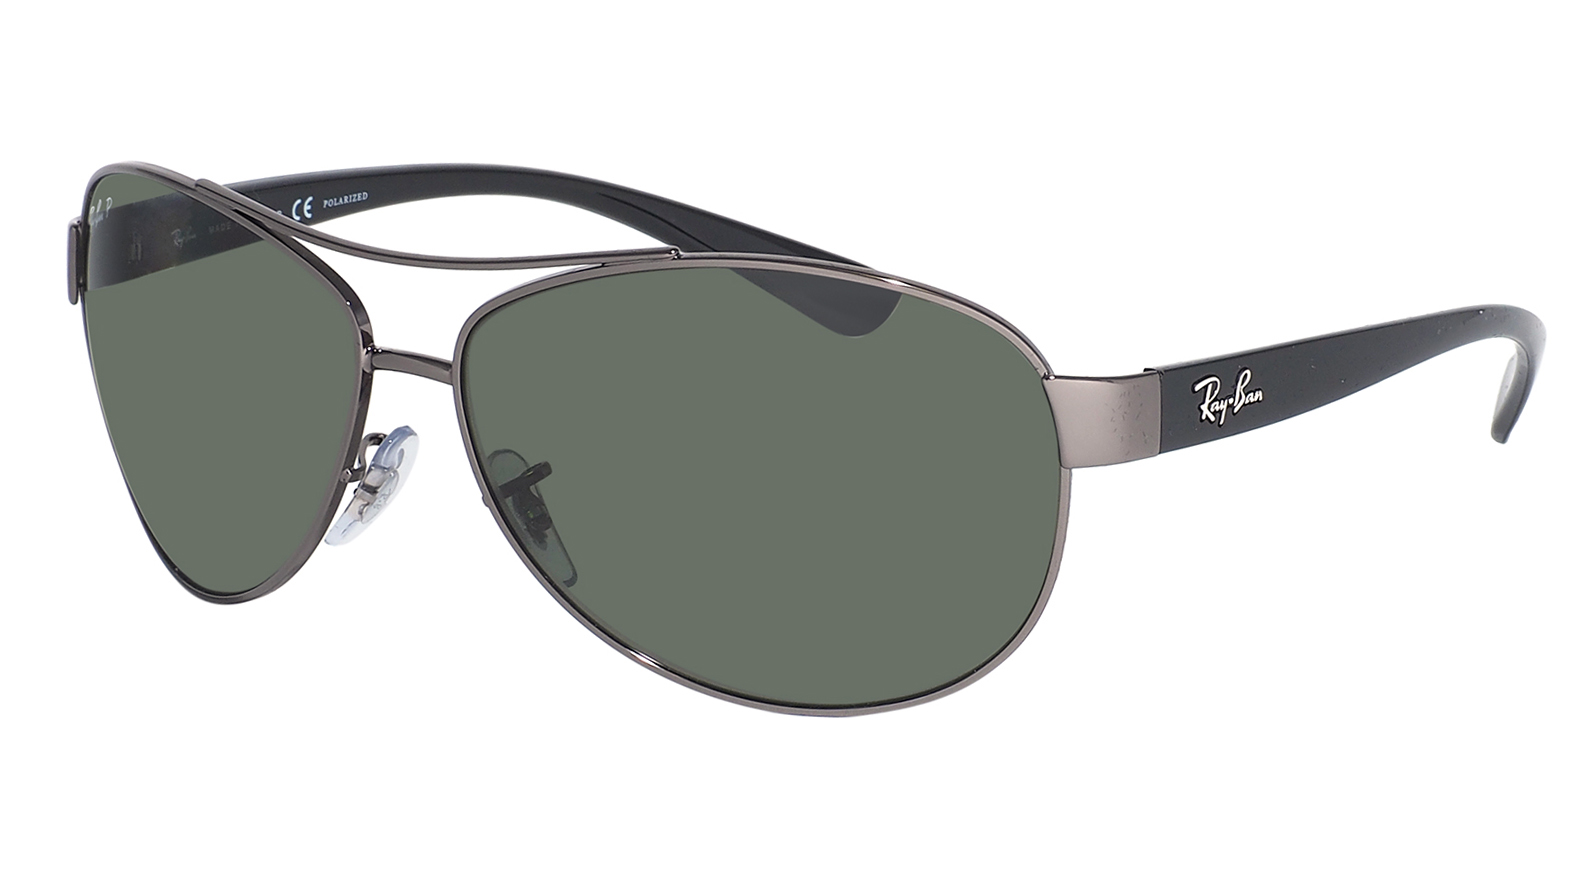 Ray-Ban Active Lifestyle RB 3386 004/9A ray ban active lifestyle rb 3386 004 9a